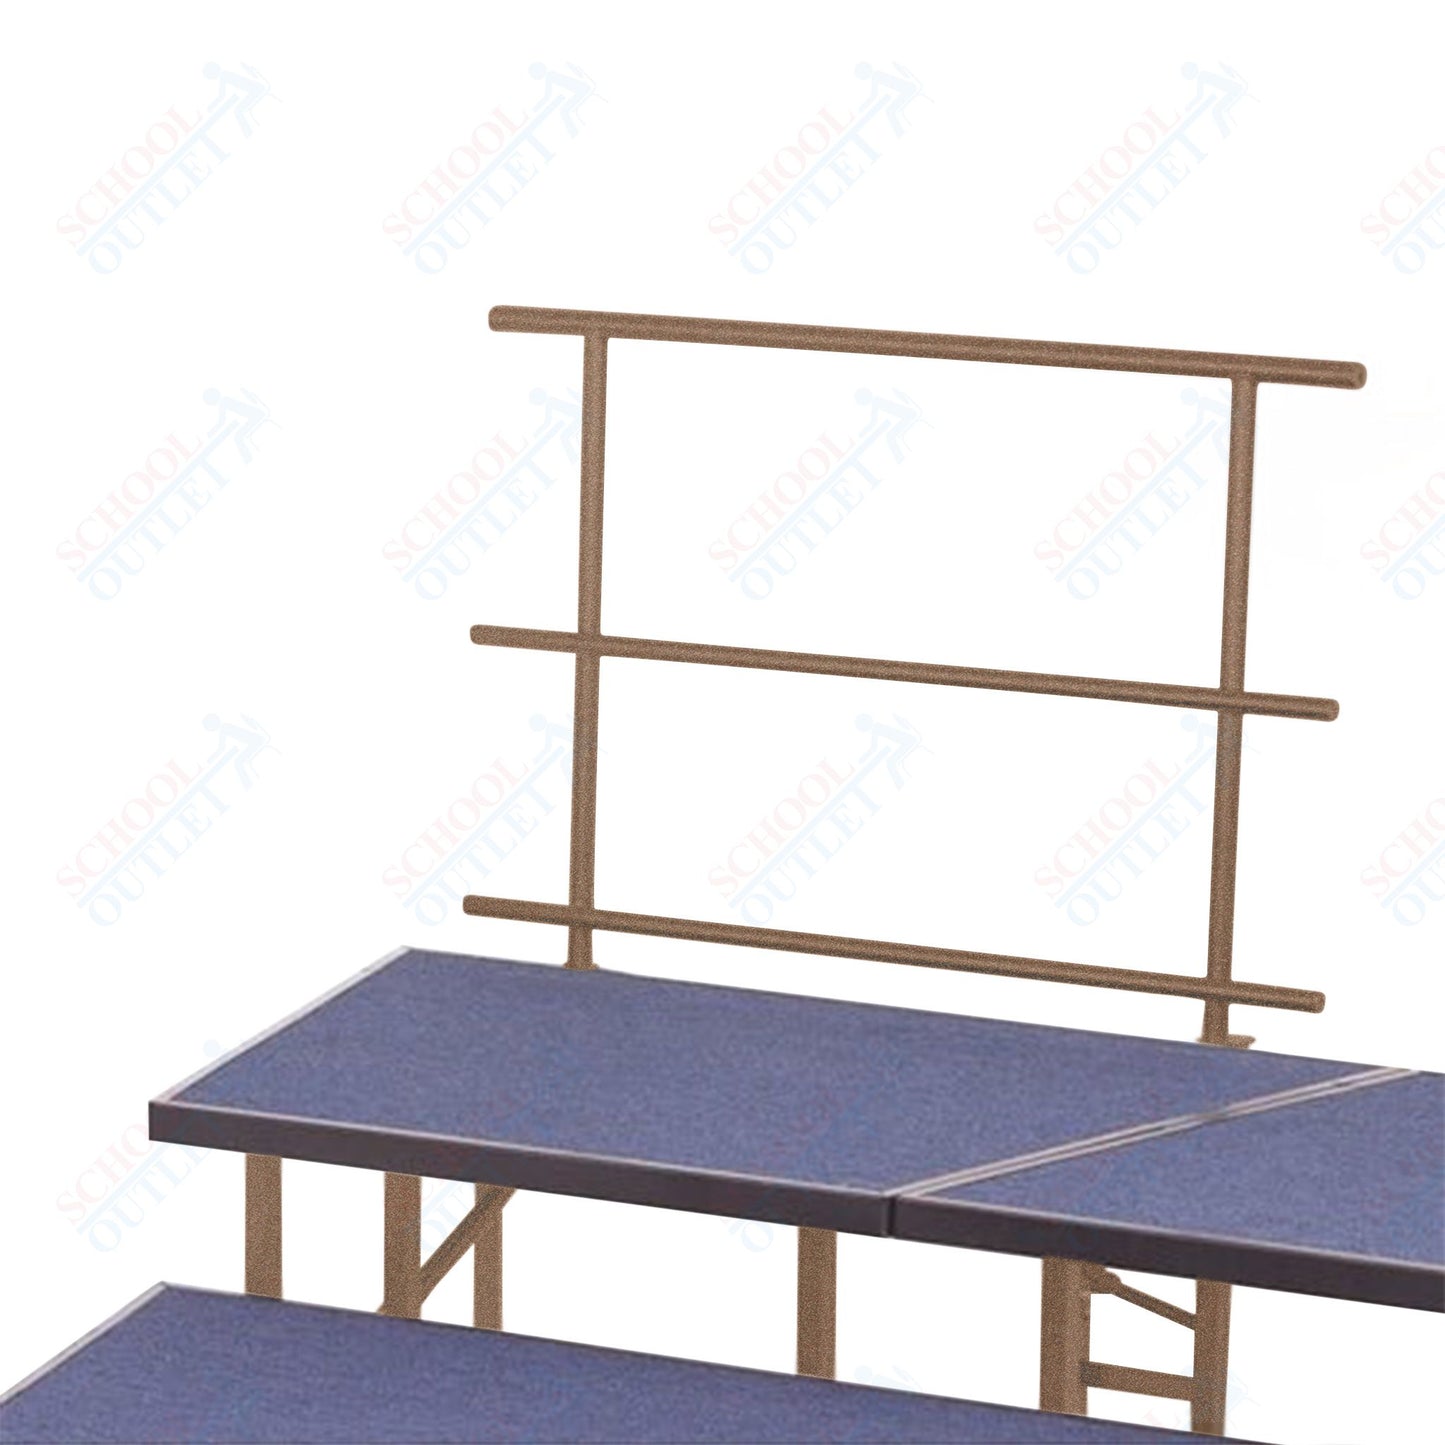 AmTab Stage and Riser Guard Rail - Chair Stop - 46"W x 31"H  (AmTab AMT-STGR48)